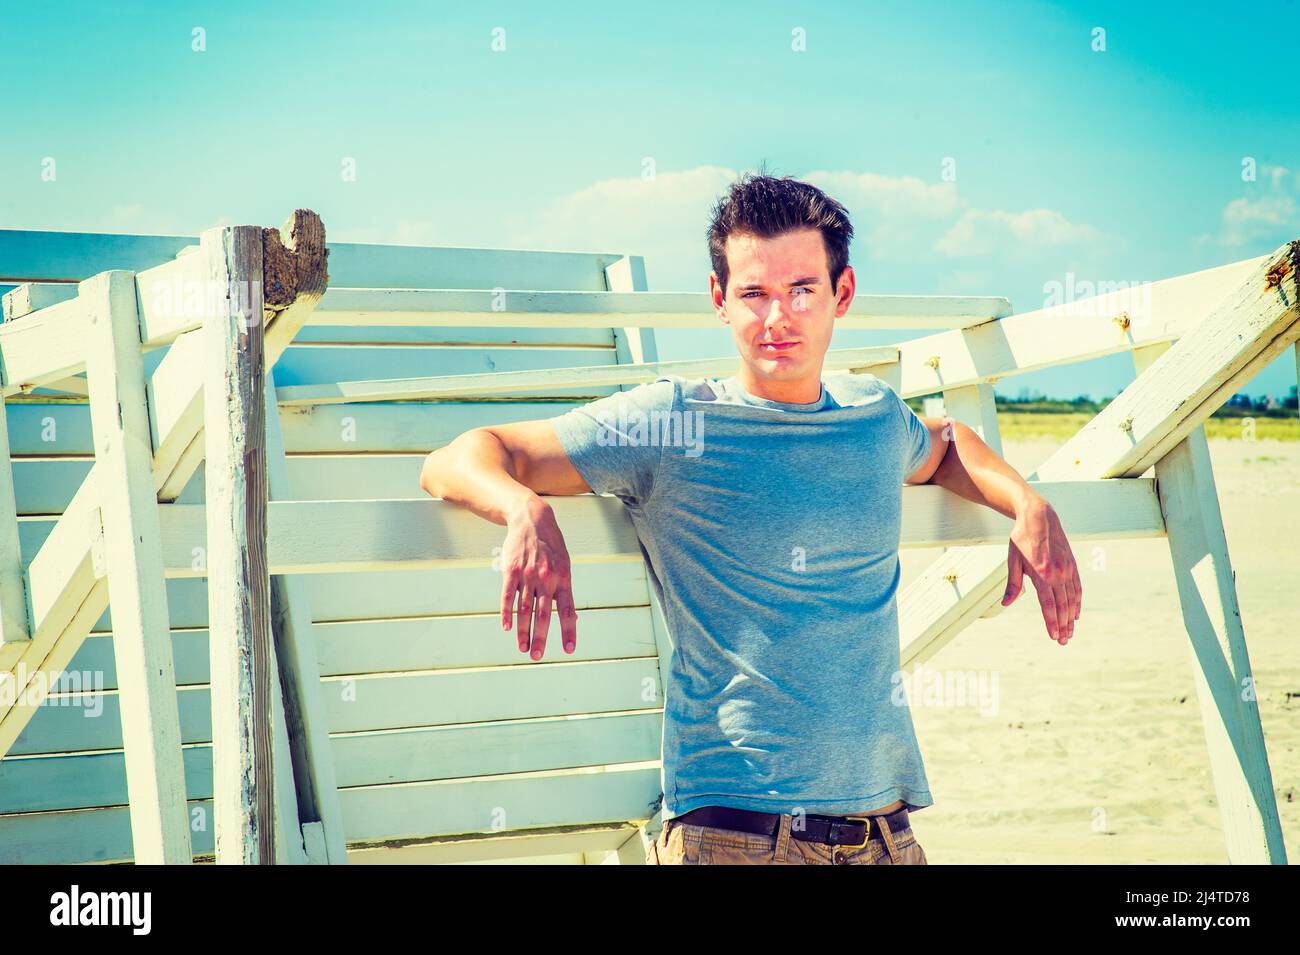 Man waiting for you. Wearing a gray t shirt, arms resting on a wooden stick, a young handsome guy is standing by a wooden structure on the beach, narr Stock Photo